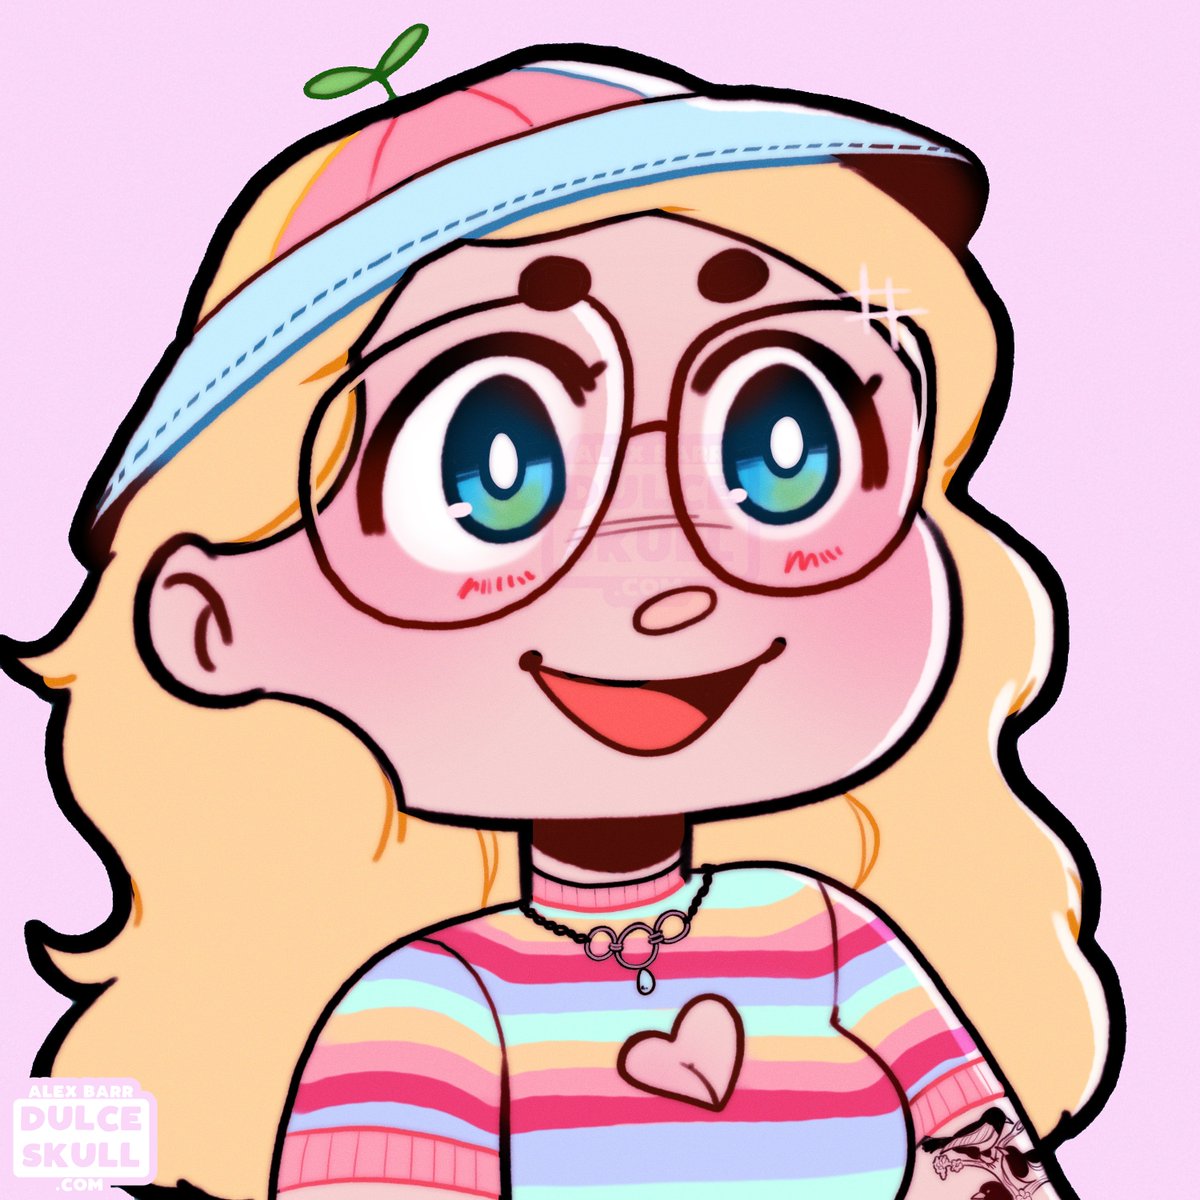 profile pic commission for lovely Sophie/capnsoapy ! You are a doll to work for and I'm honored you chose me to update your iconic look <3

commissions.dulceskull.com

#illustratorsoninstagram #illustration #art #artist #artistsoninstagram #sketch #drawing #digitalart